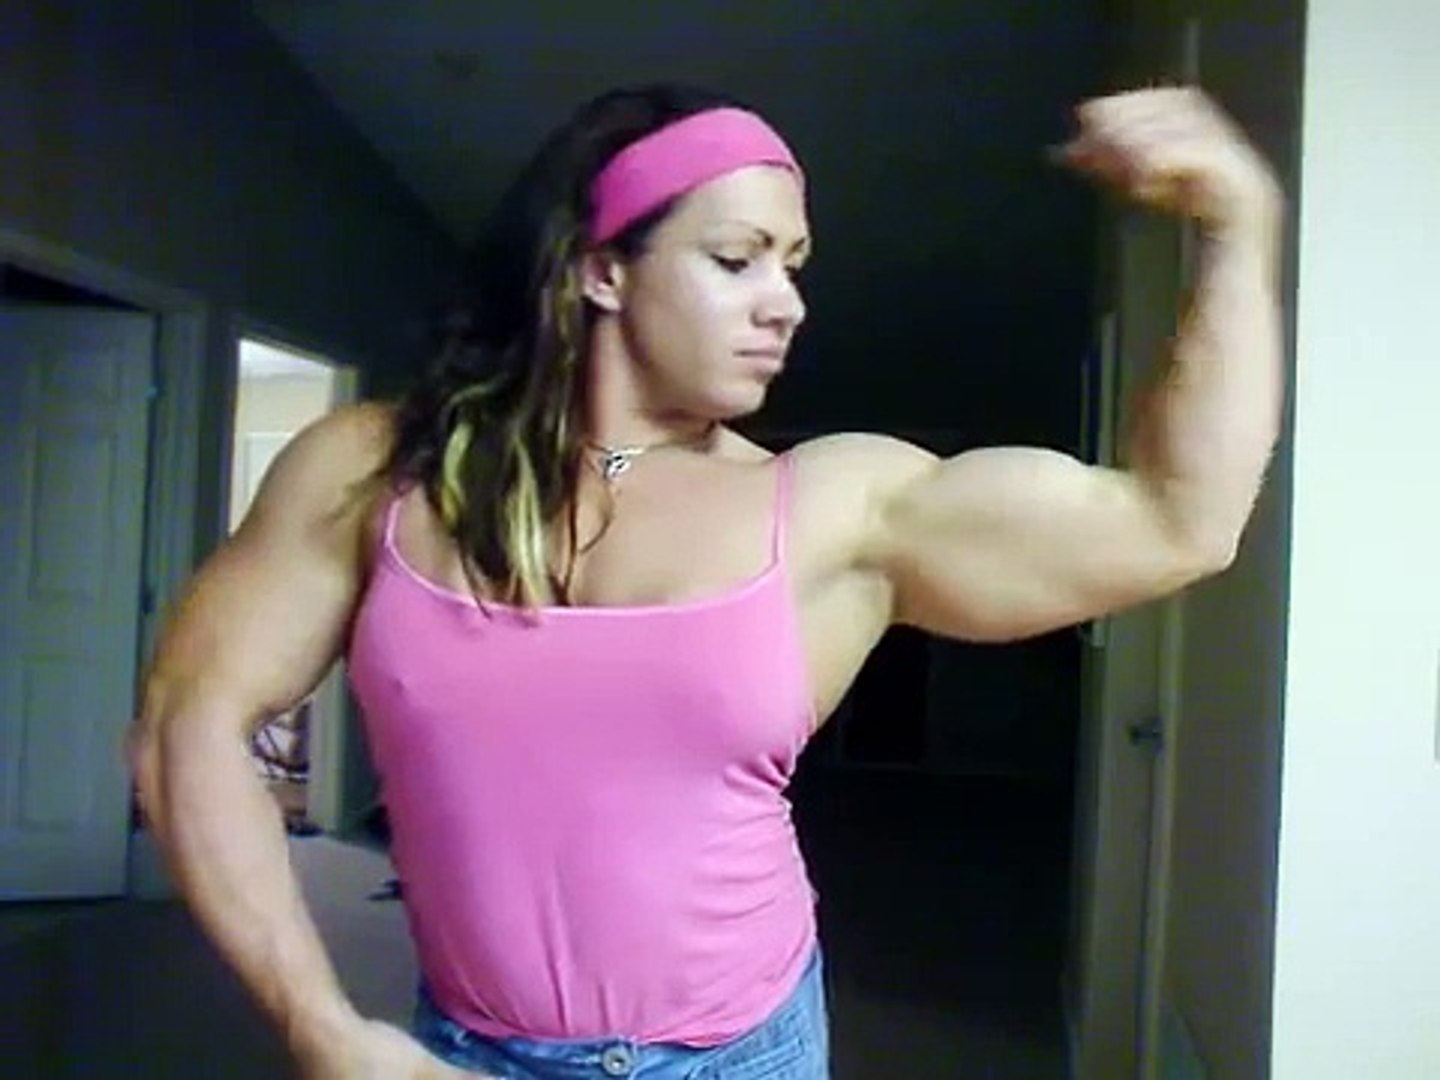 Best of Her bicep cam